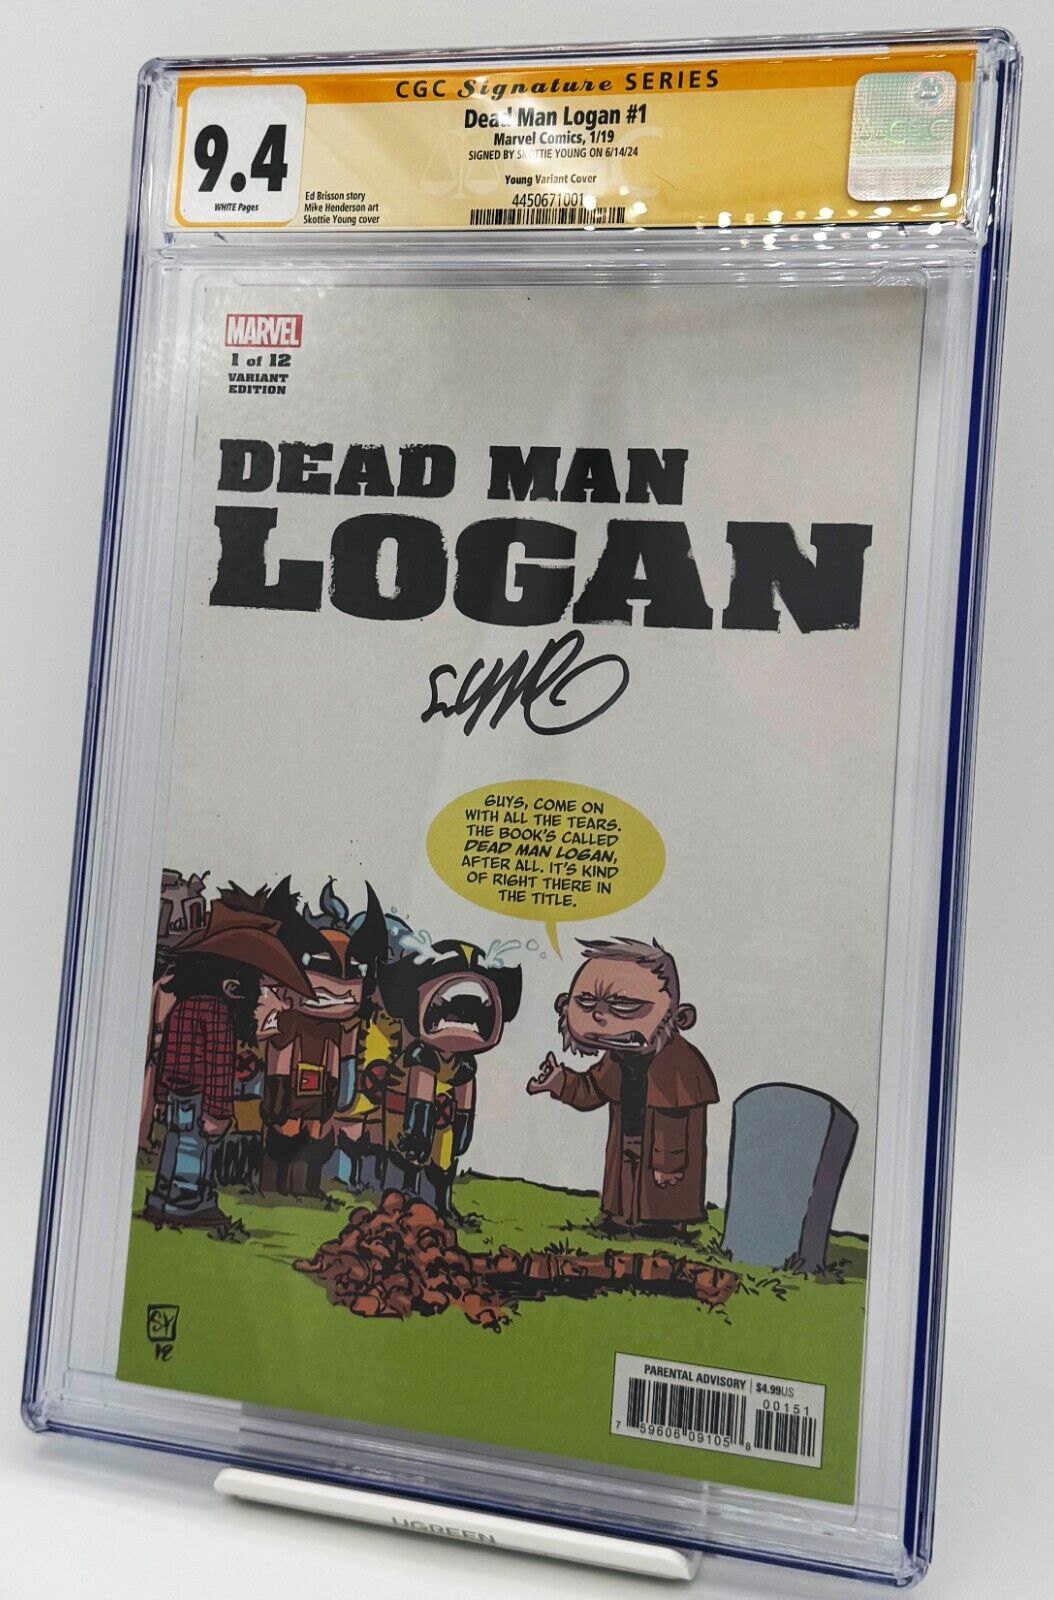 Dead Man Logan #1 signed by Skottie Young, NEW SLAB CGC Signature Series 9.4